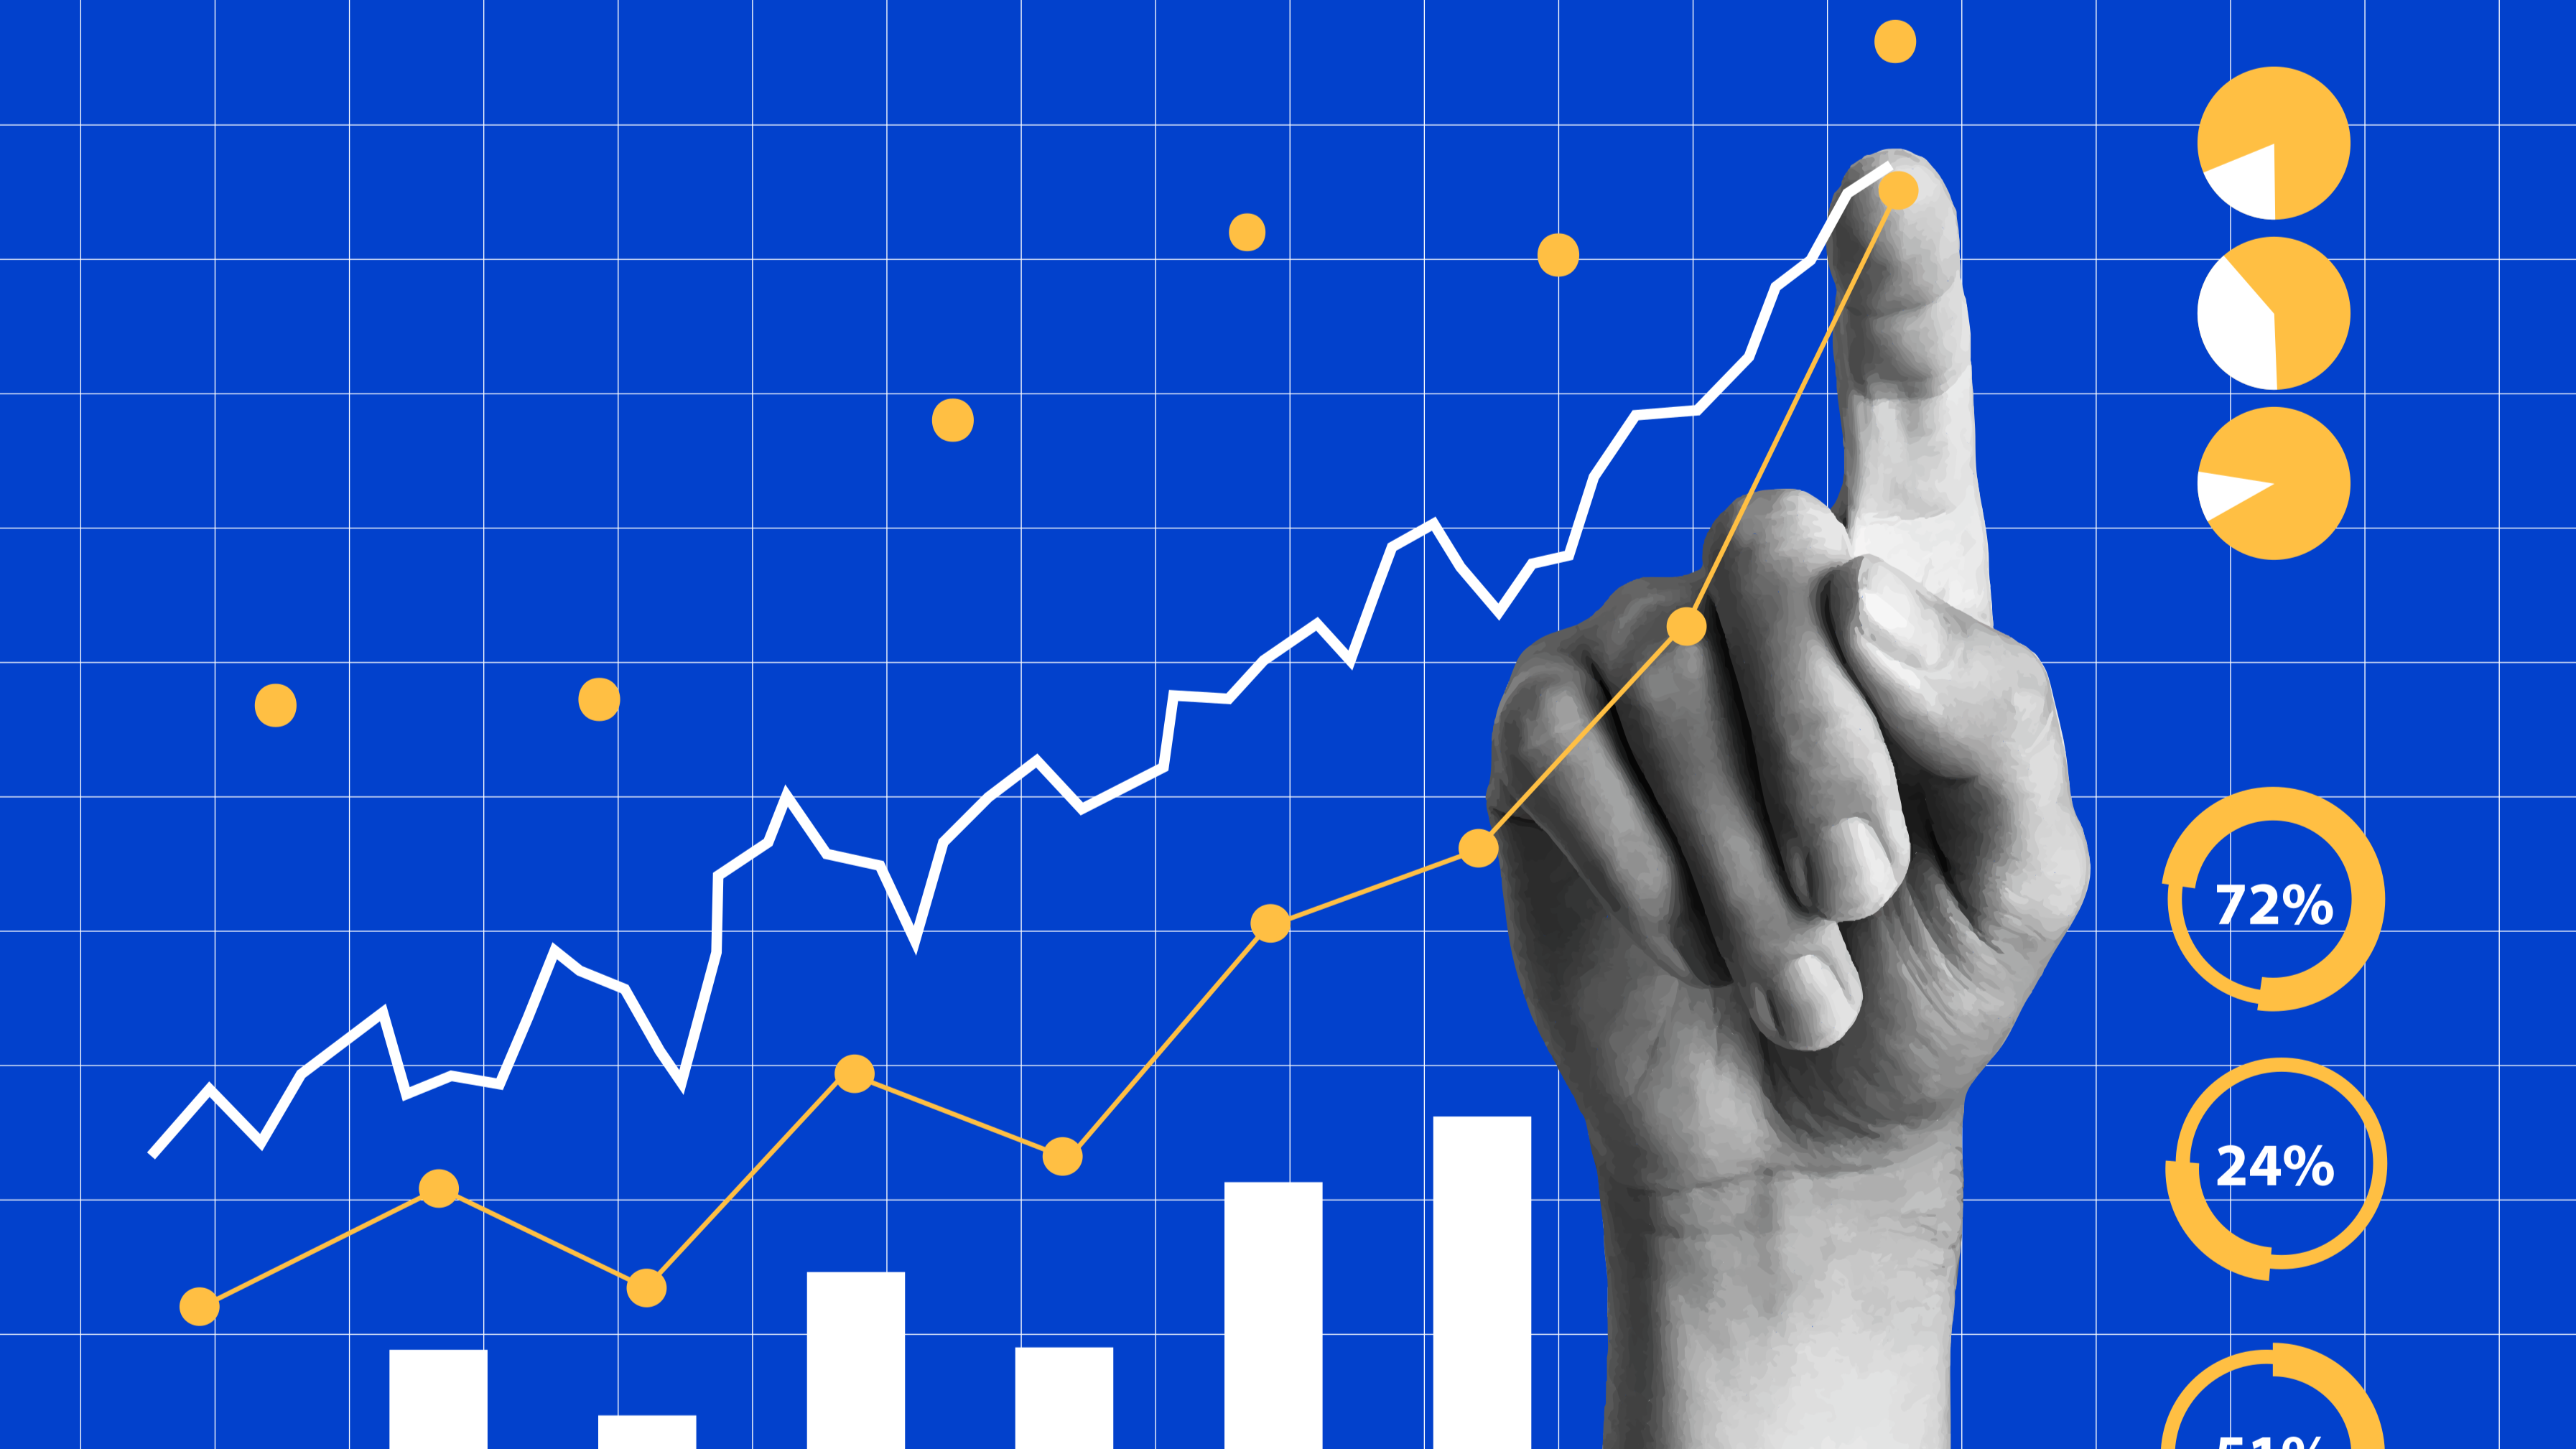 Hand pointing at upward trending line graph on blue background with financial charts and pie chart statistics